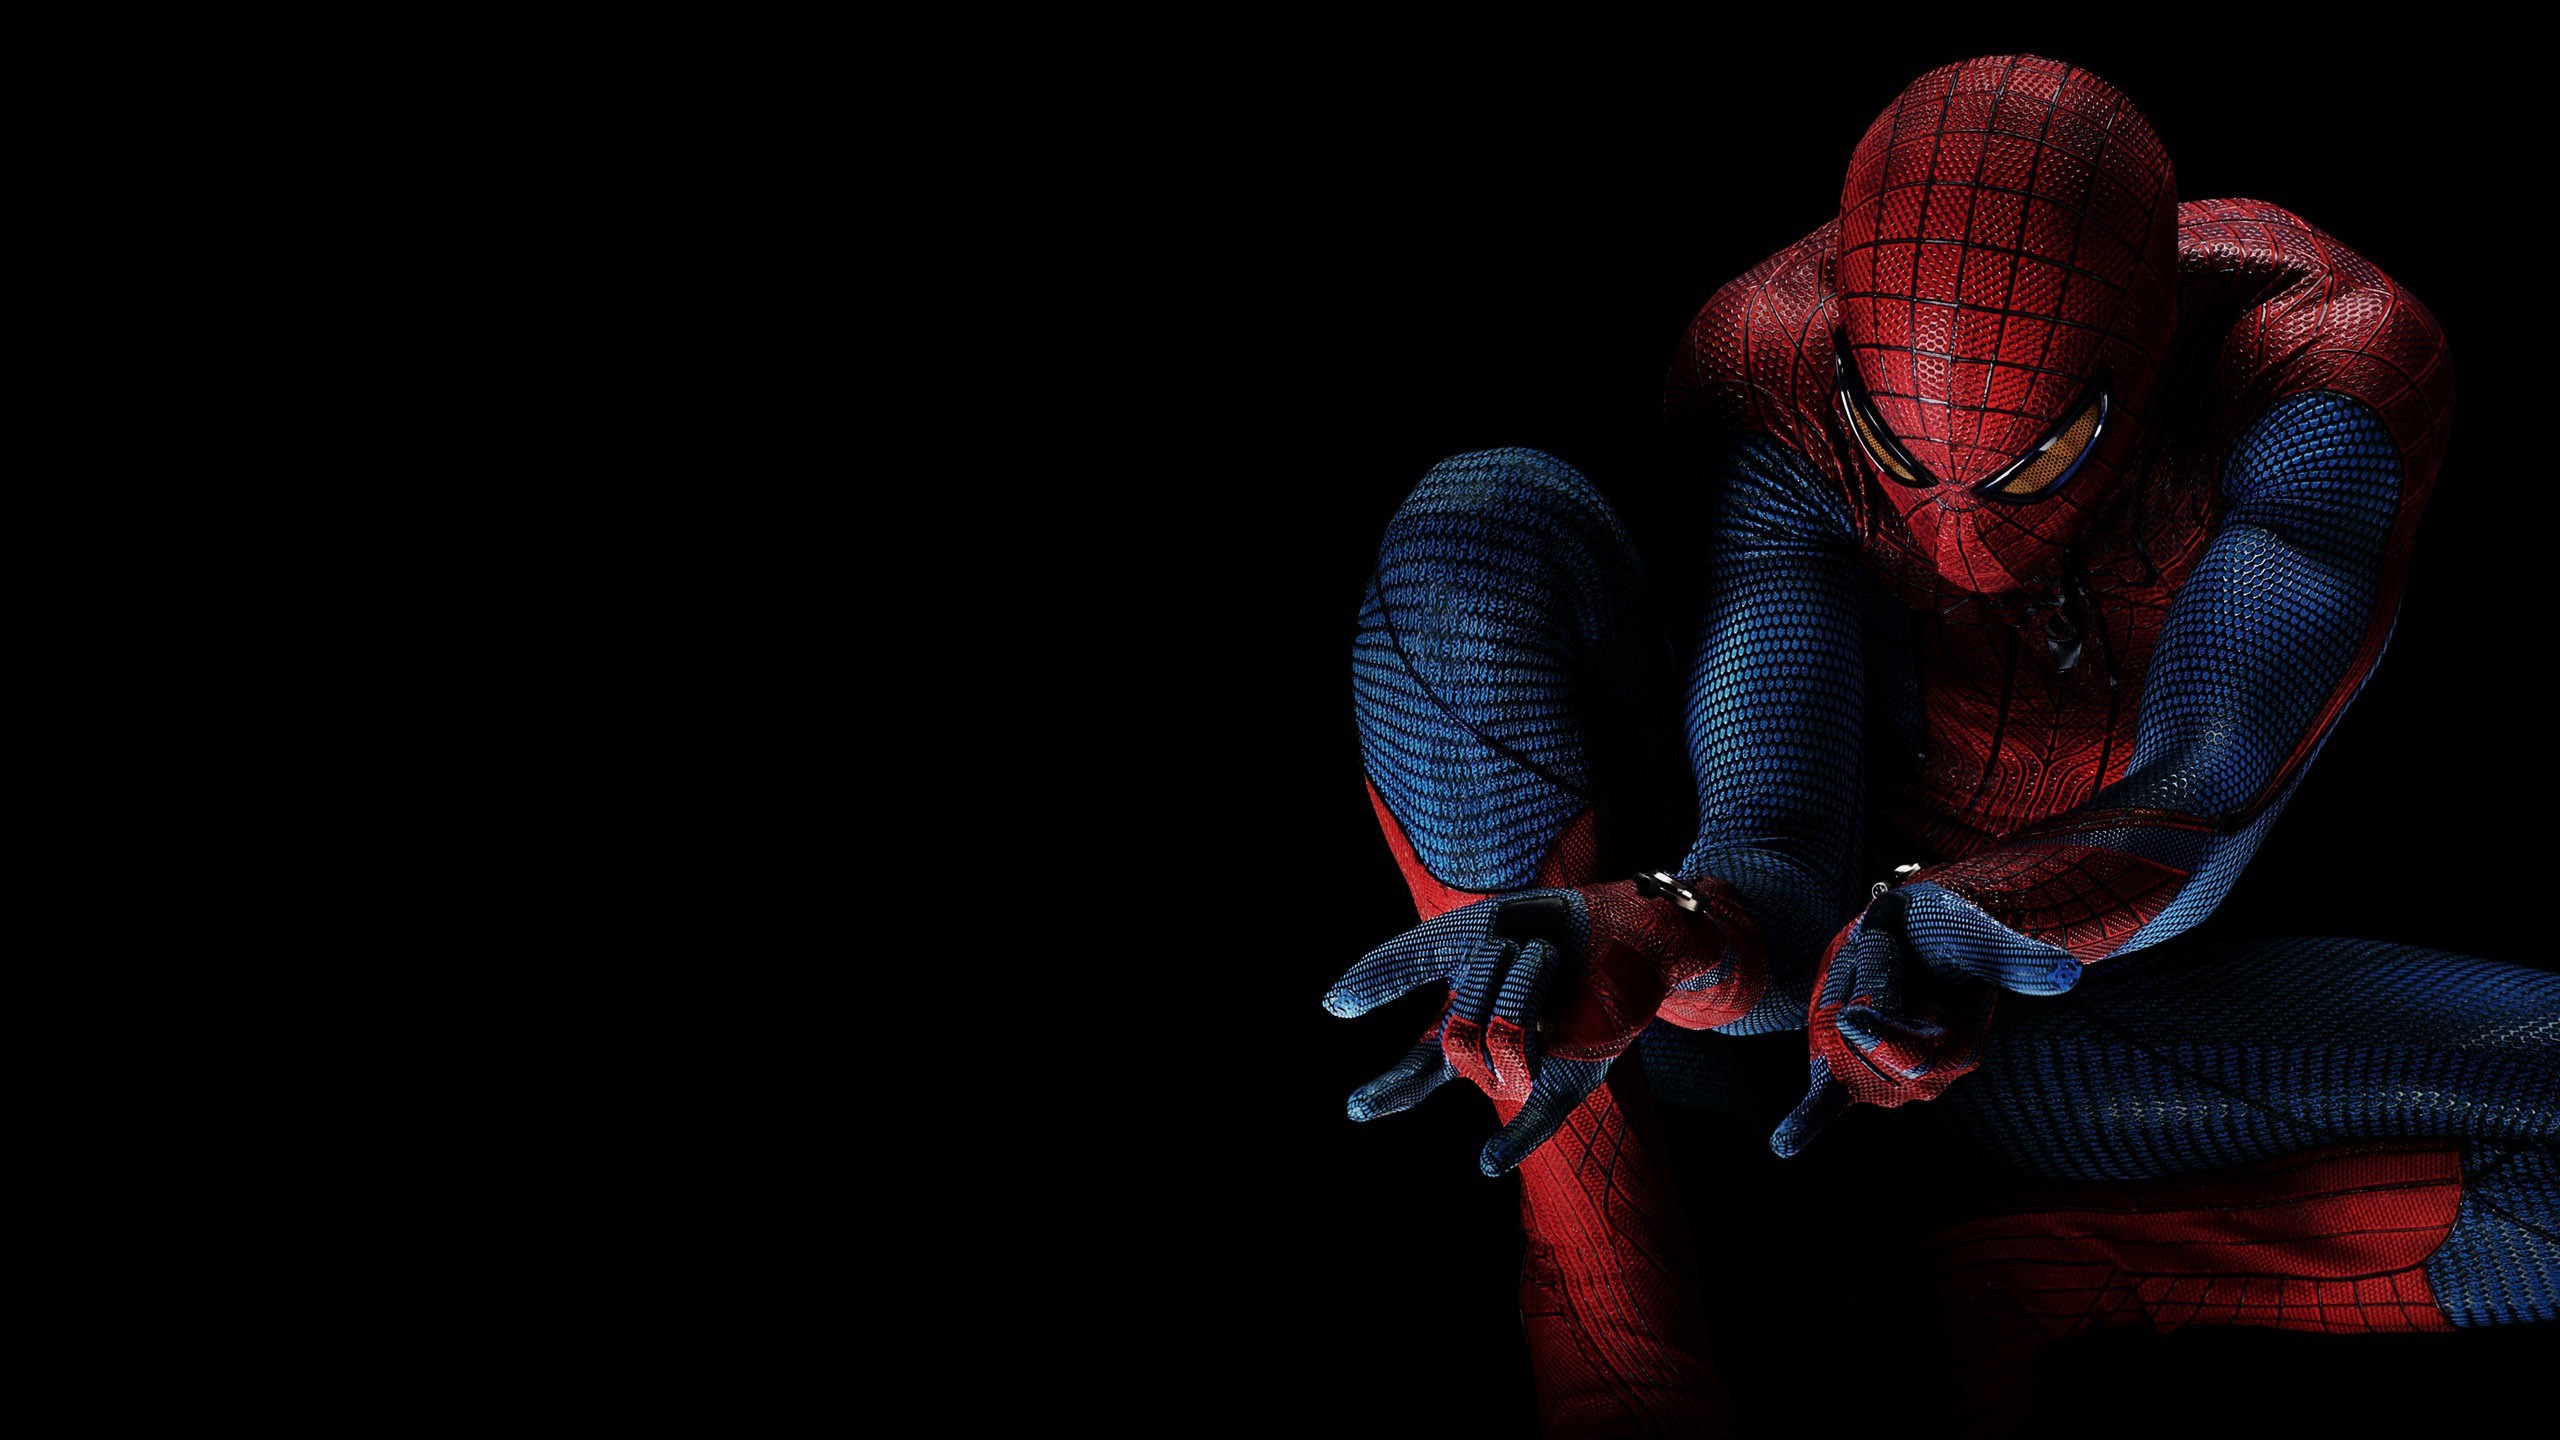 2560x1440 The Amazing Spider Man Movie 6 wallpaper from Dark wallpapers